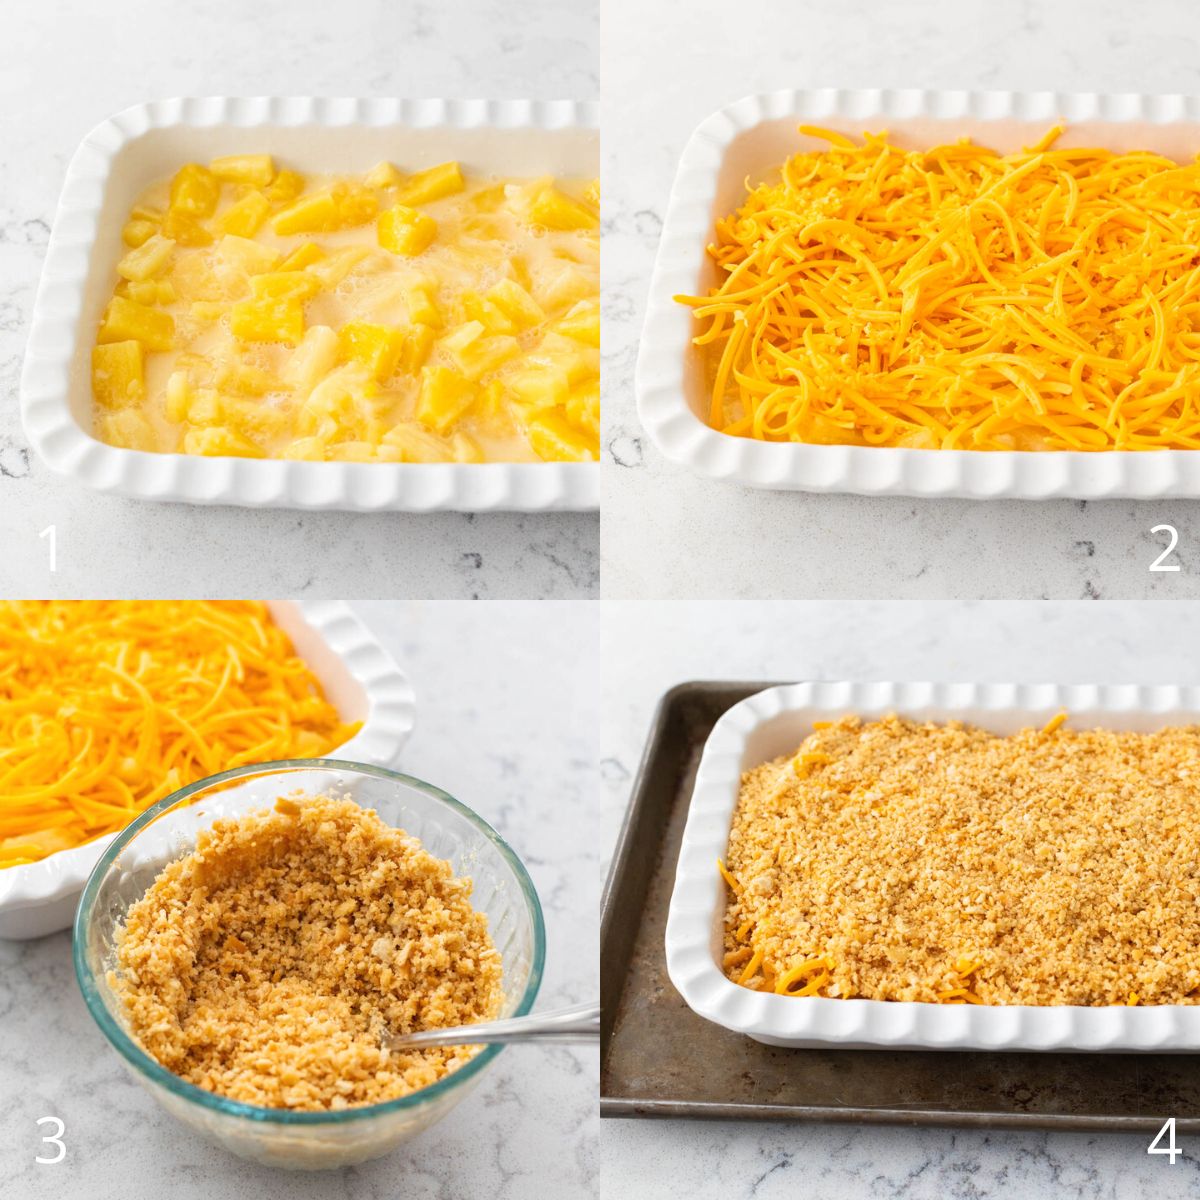 The step by step photos show how to assemble the pineapple cheese casserole.